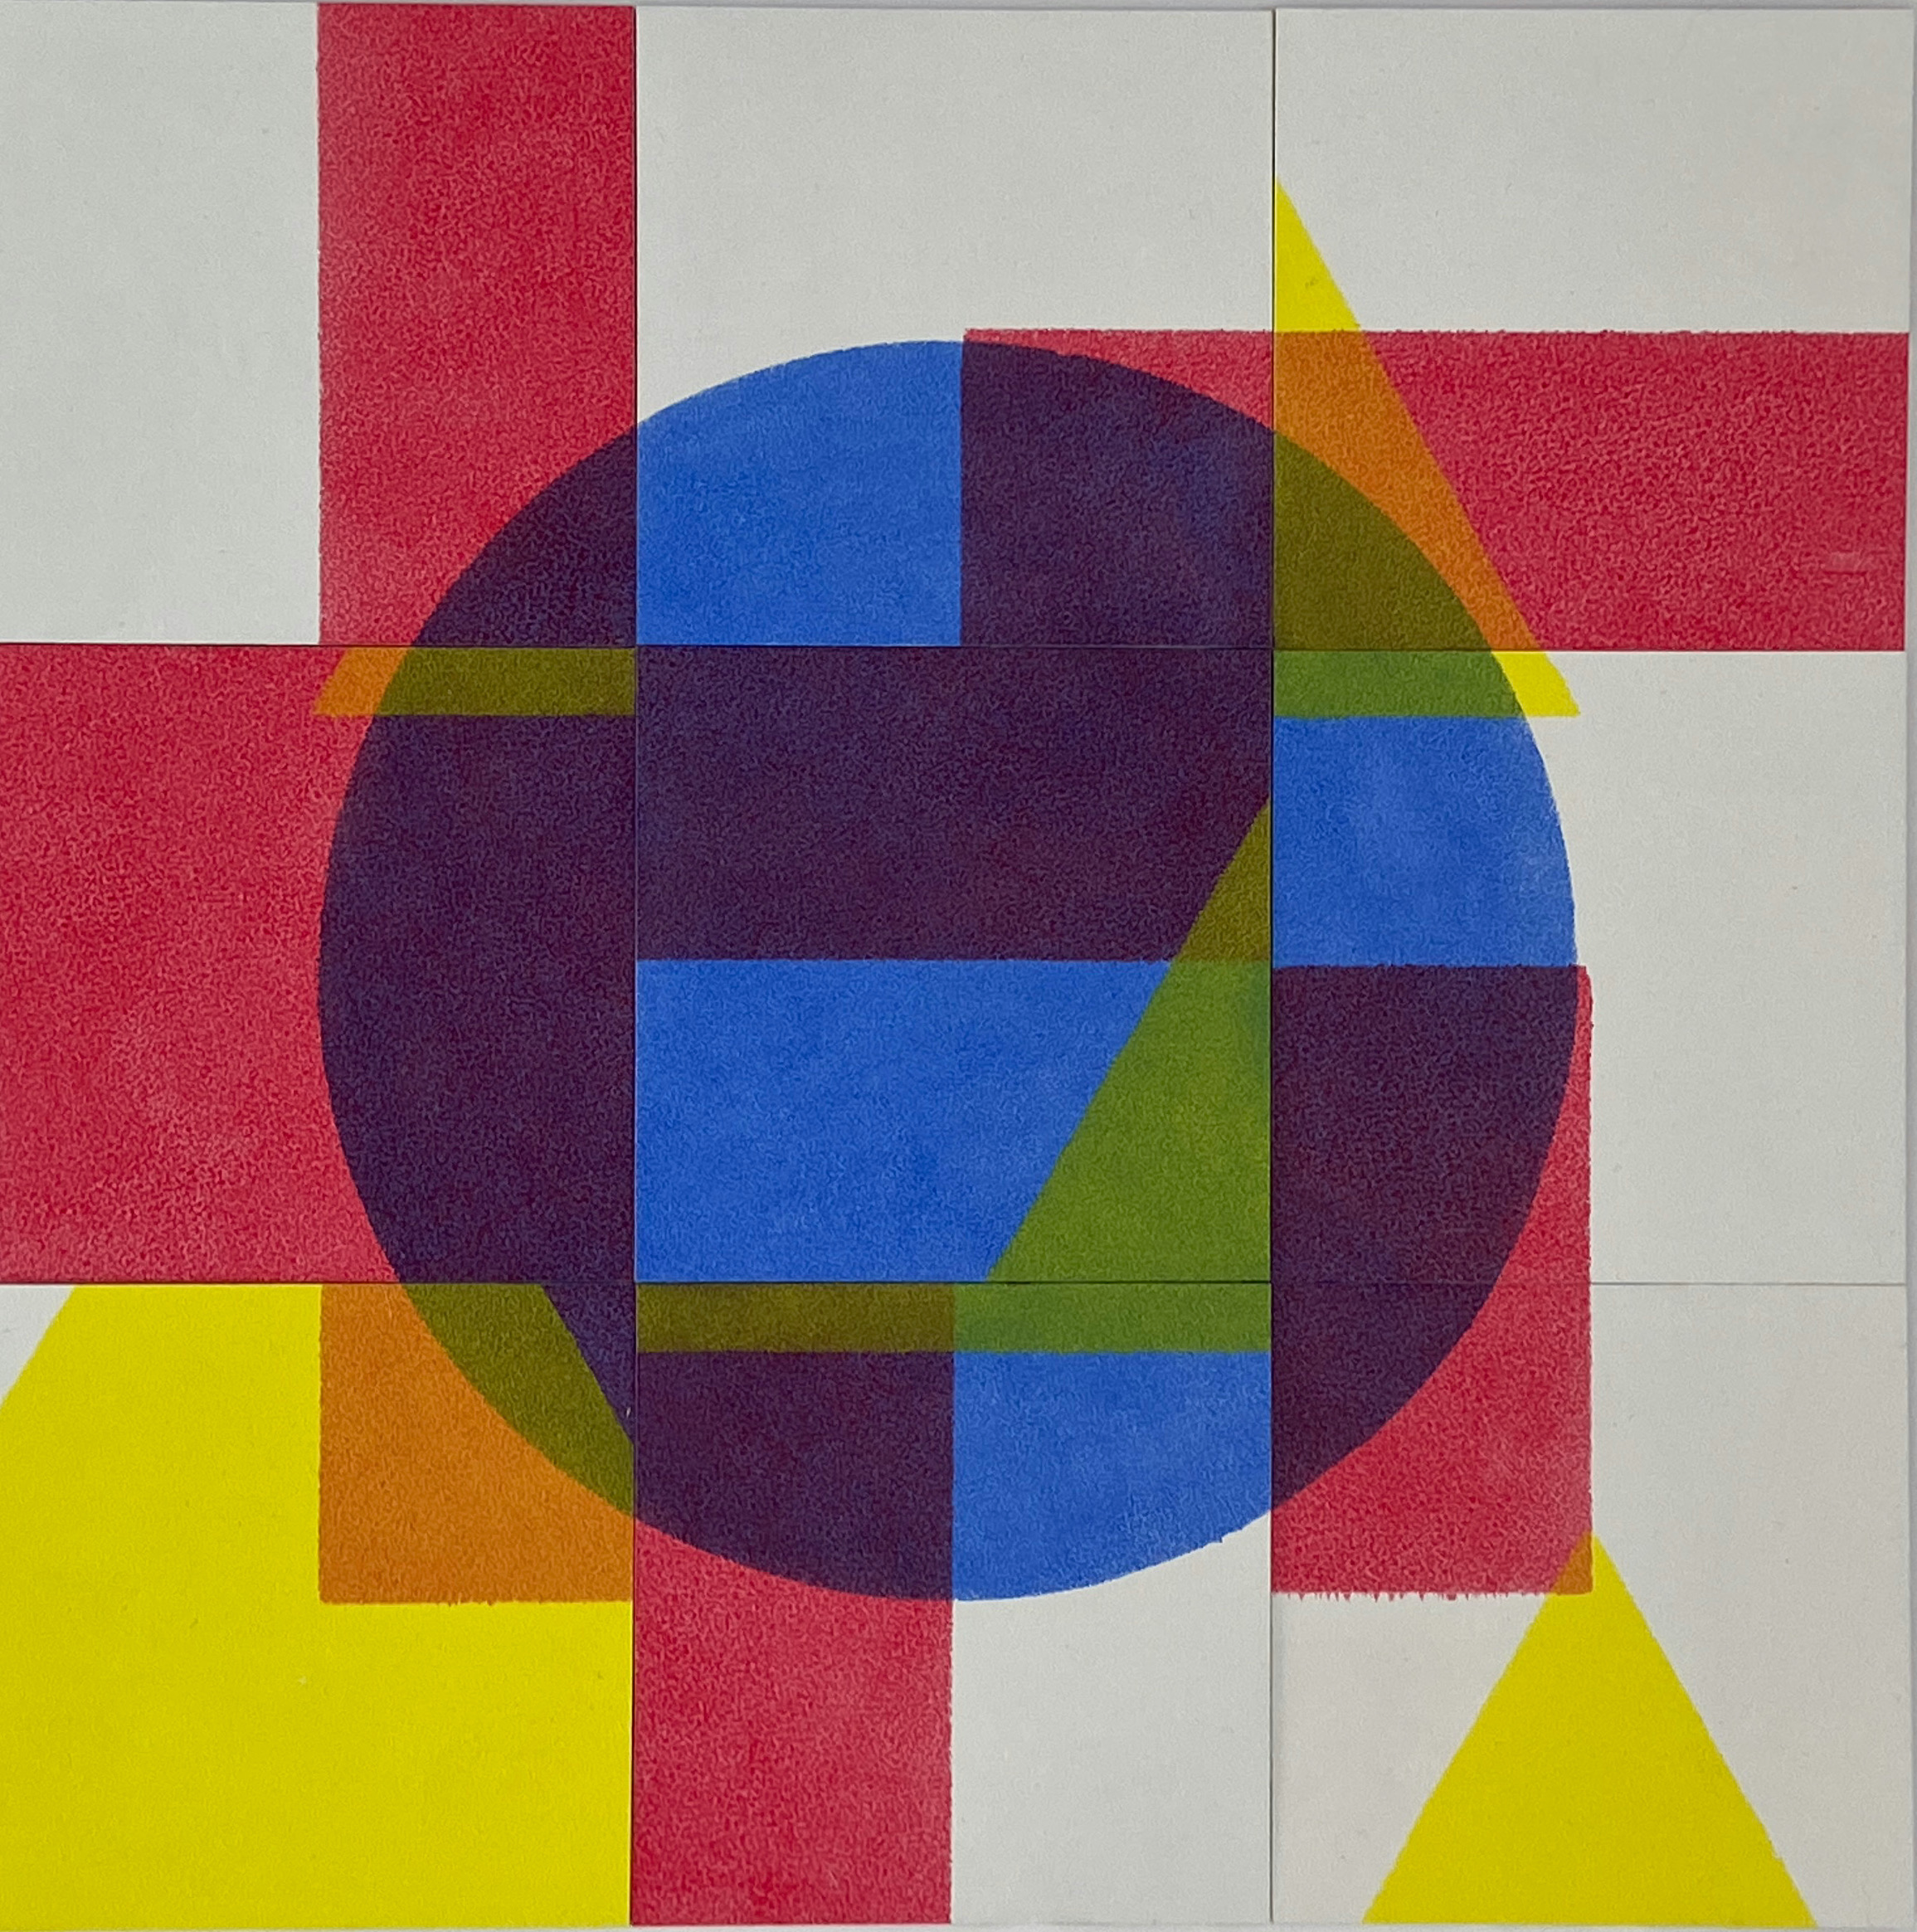 contemporary art multi panel oil painting in primary colors called Blue Circle Red Square Yellow Triangle by saatchiart artist Christian Dodd inspired by slide puzzles, geometry, colour theory and mid century design